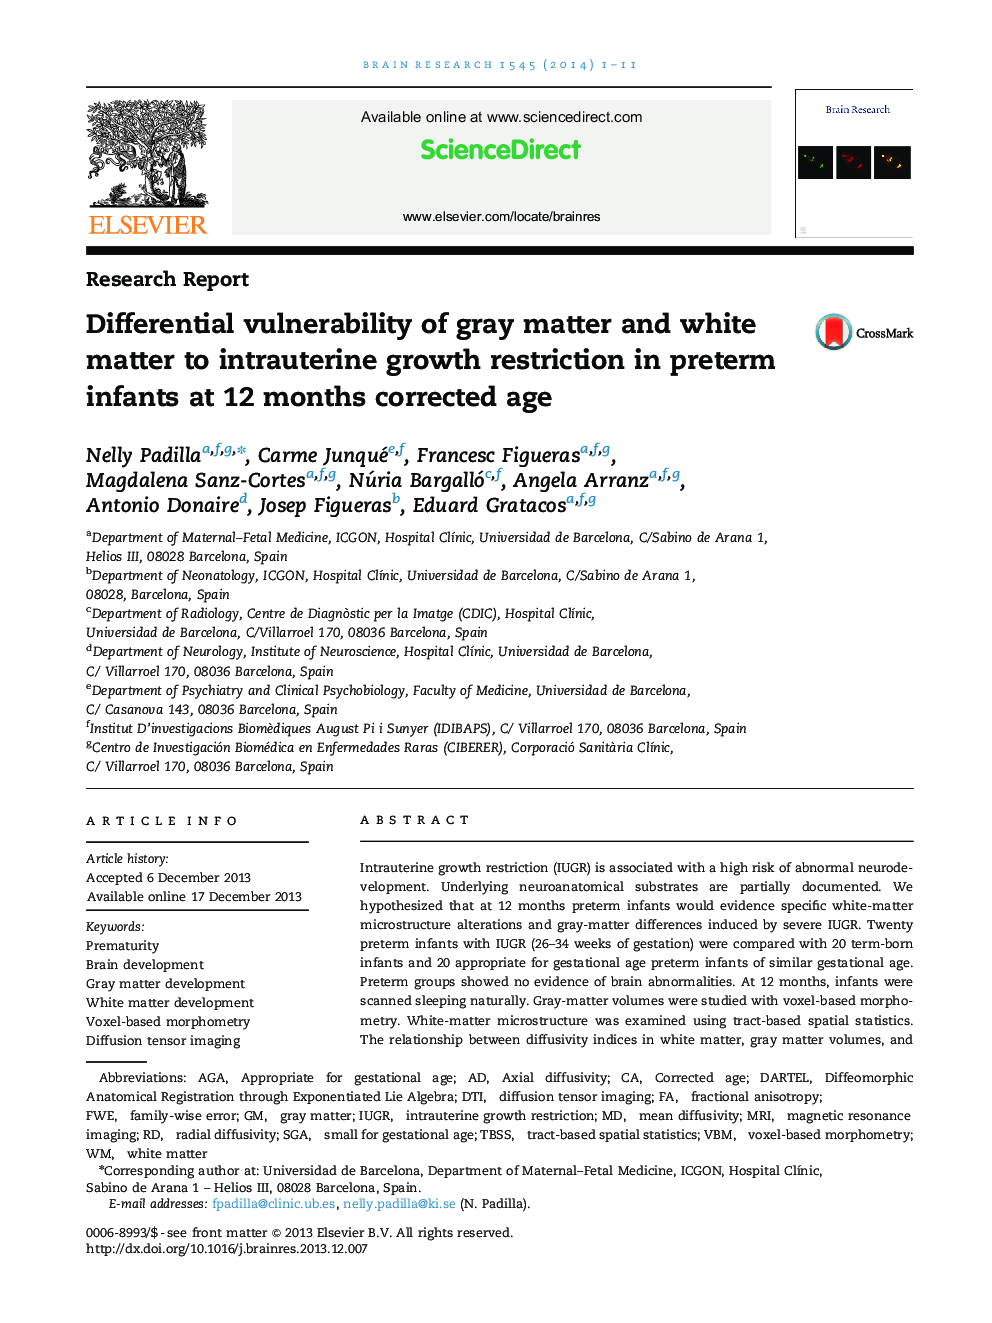 Differential vulnerability of gray matter and white matter to intrauterine growth restriction in preterm infants at 12 months corrected age